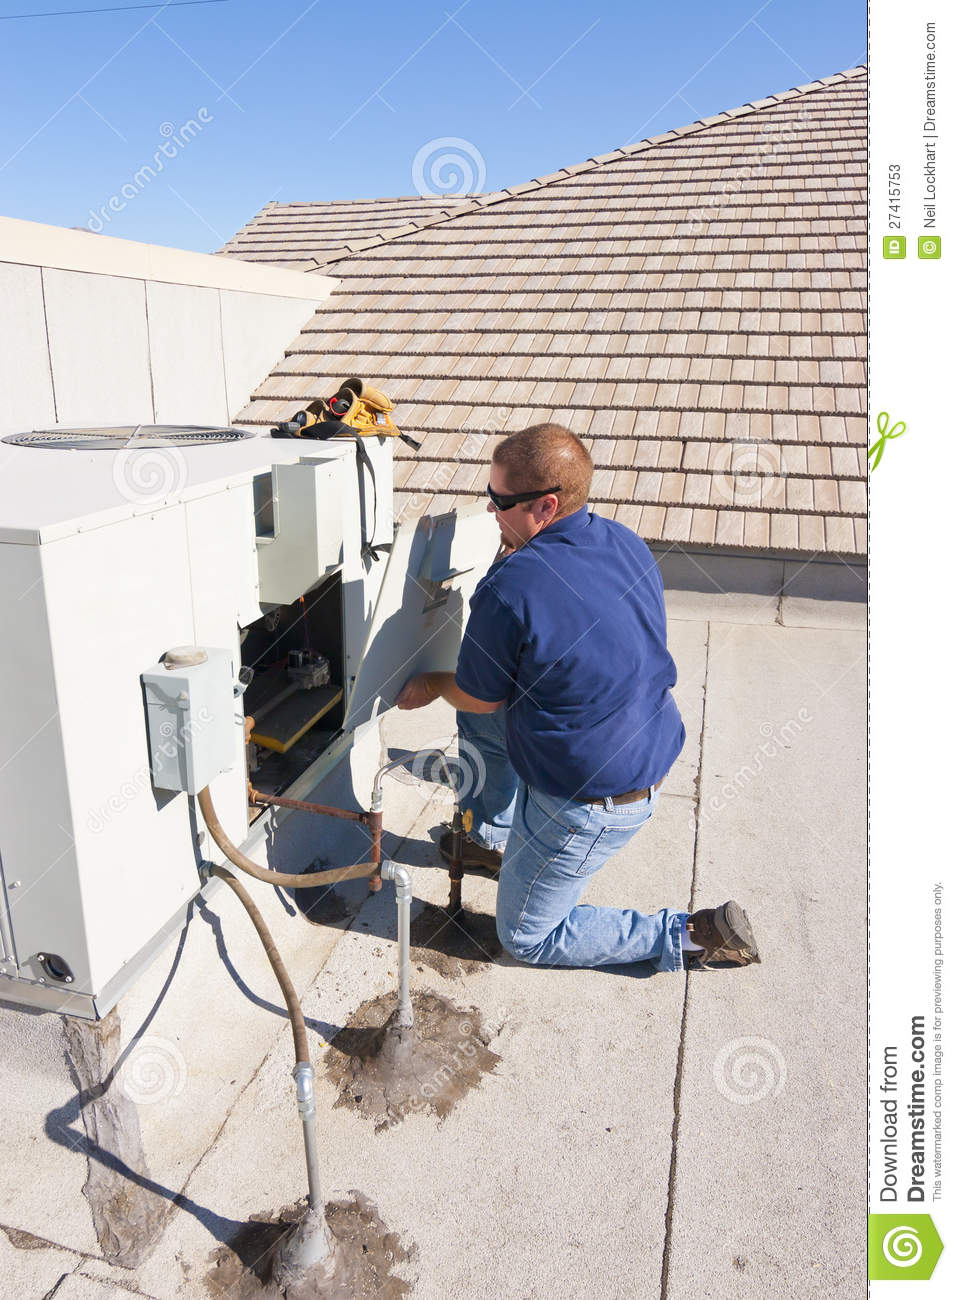 Air Conditioner Repair Man Accessing Unit On Rooftop By Removing Panel    